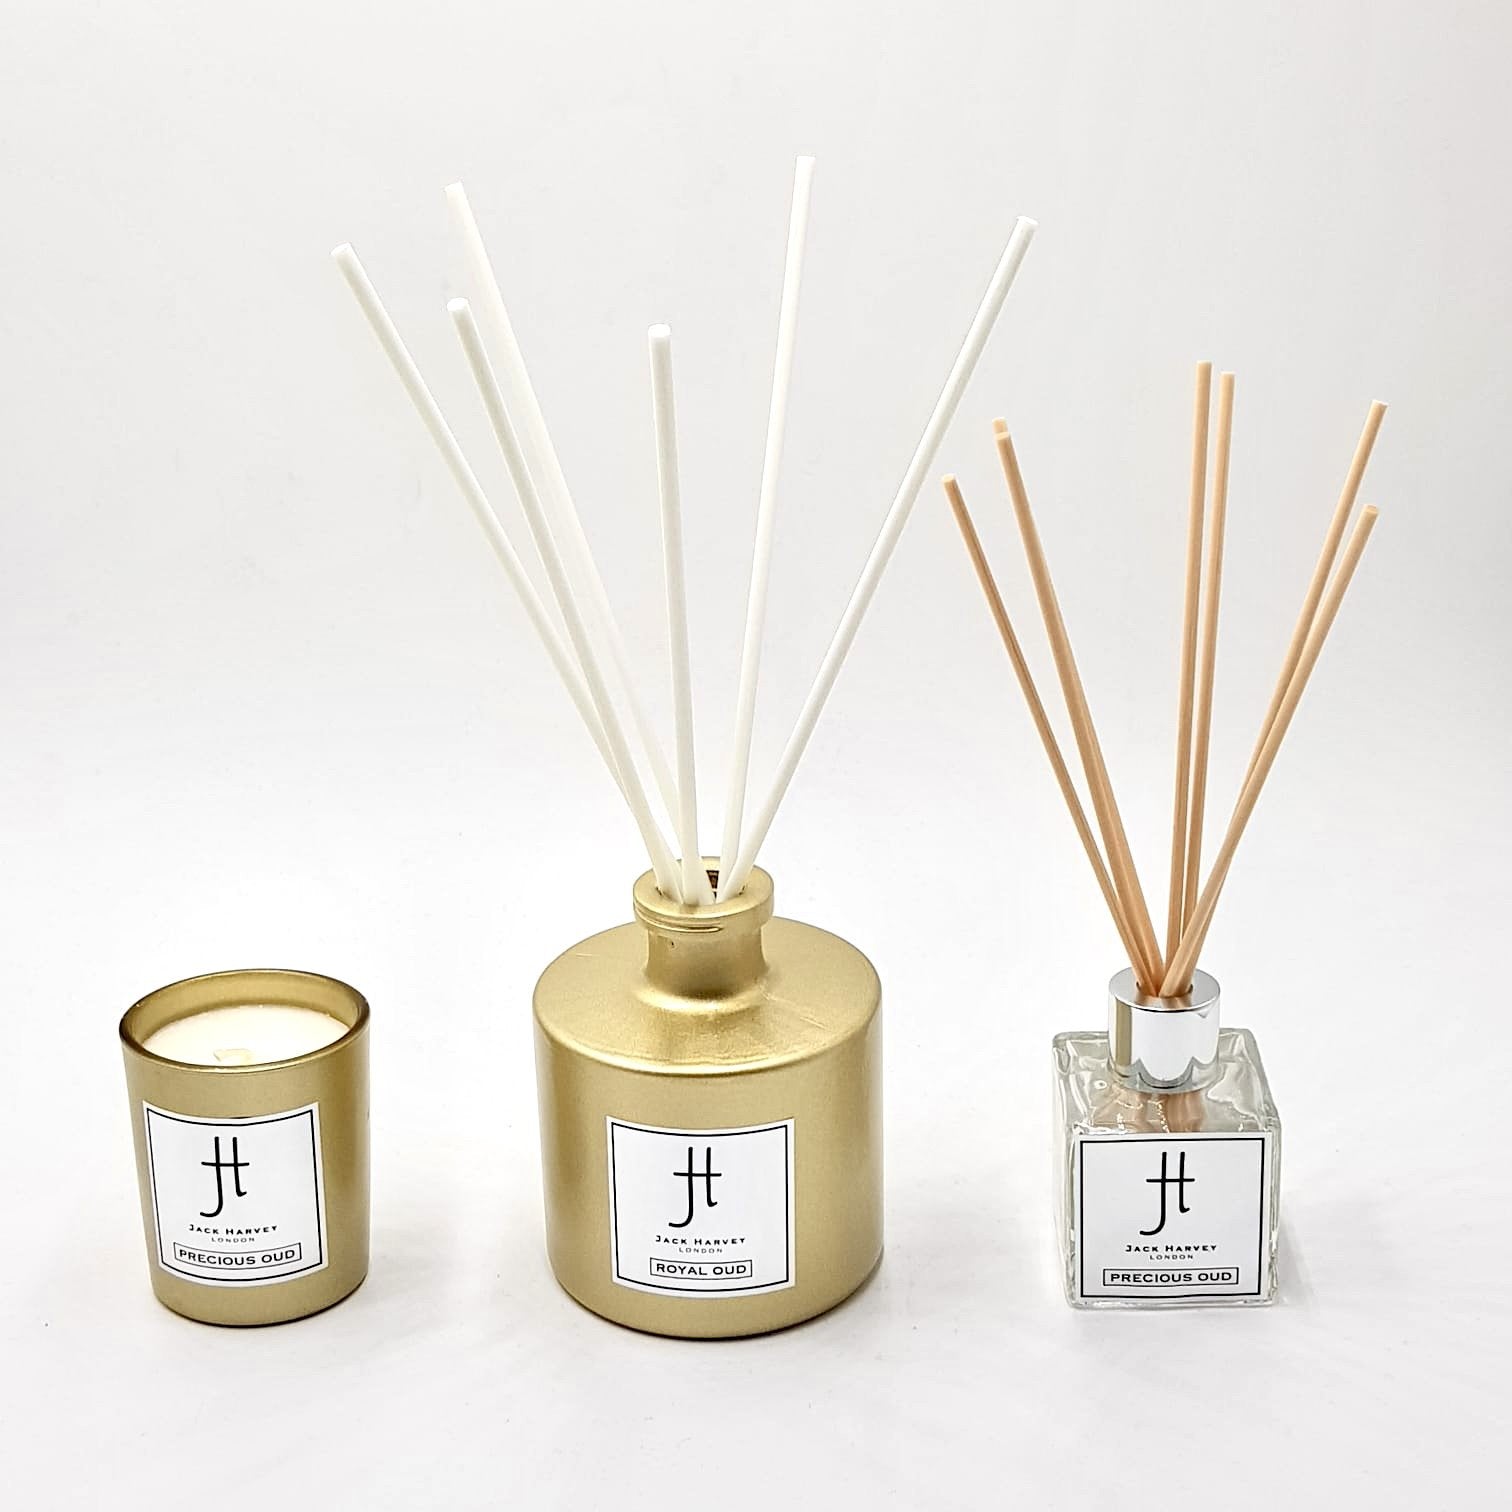 CHELSEA MINI 50ml LIMITED EDITION - LUXURY REED DIFFUSER